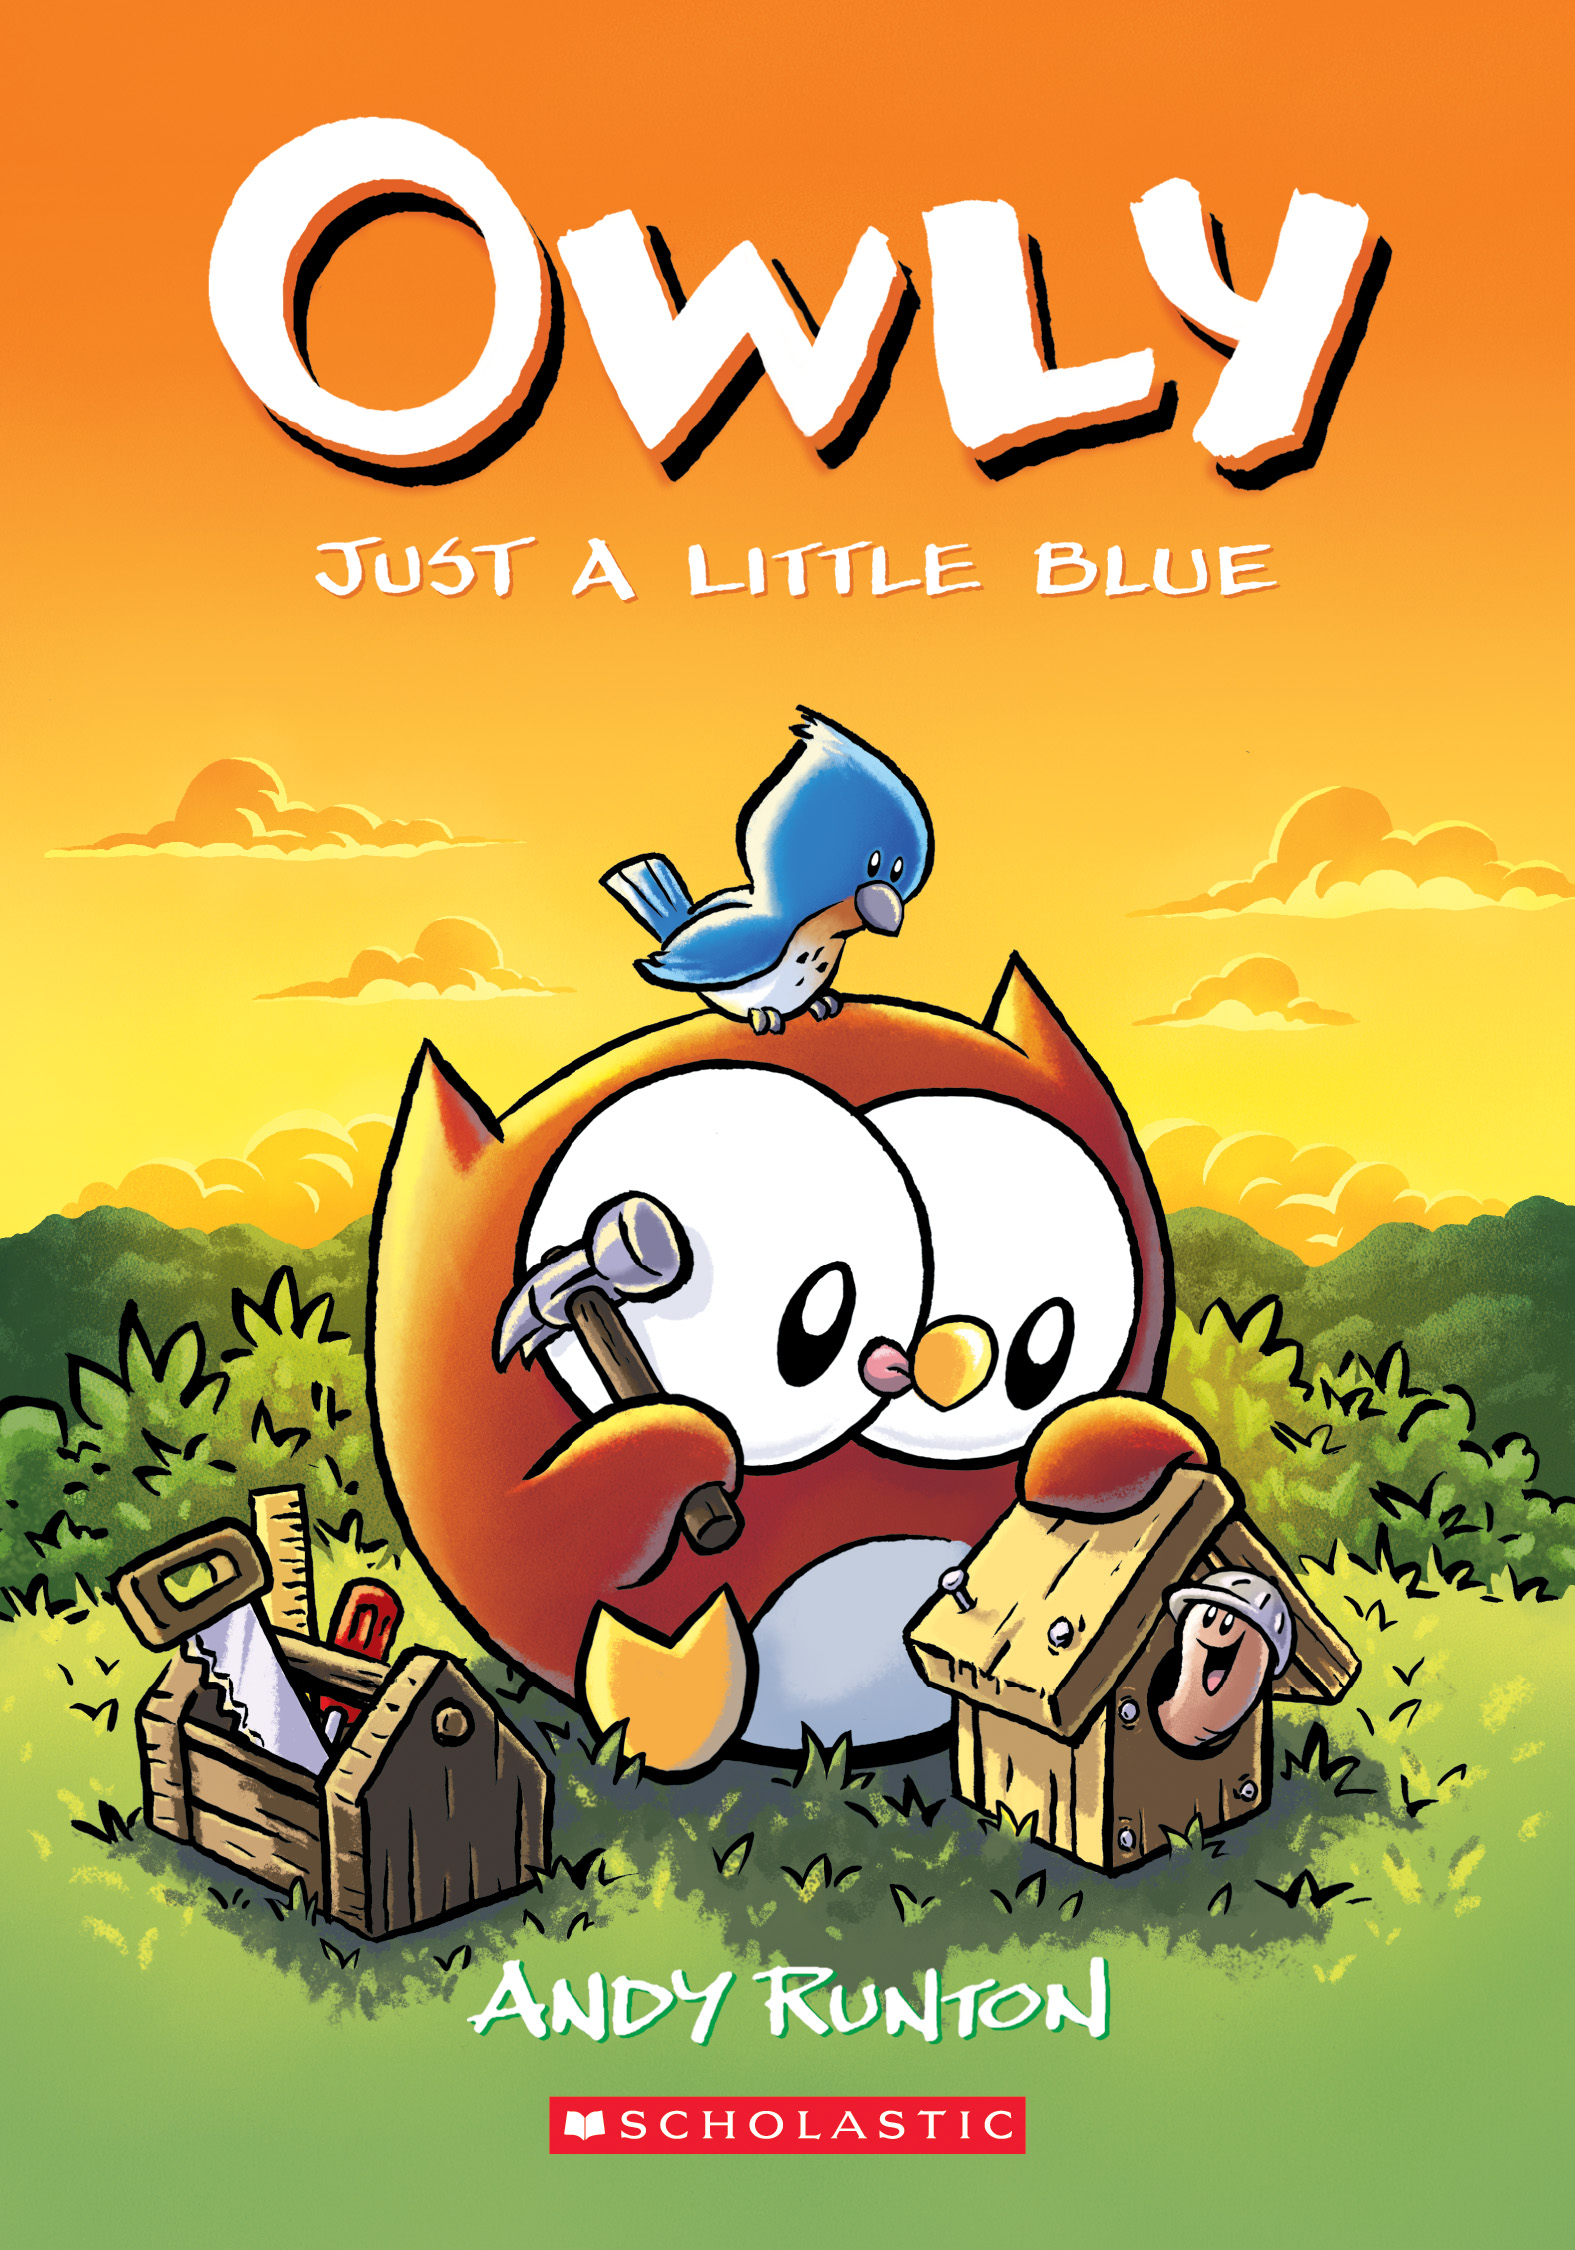 Owly Color Edition Graphic Novel Volume 2 Just A Little Blue